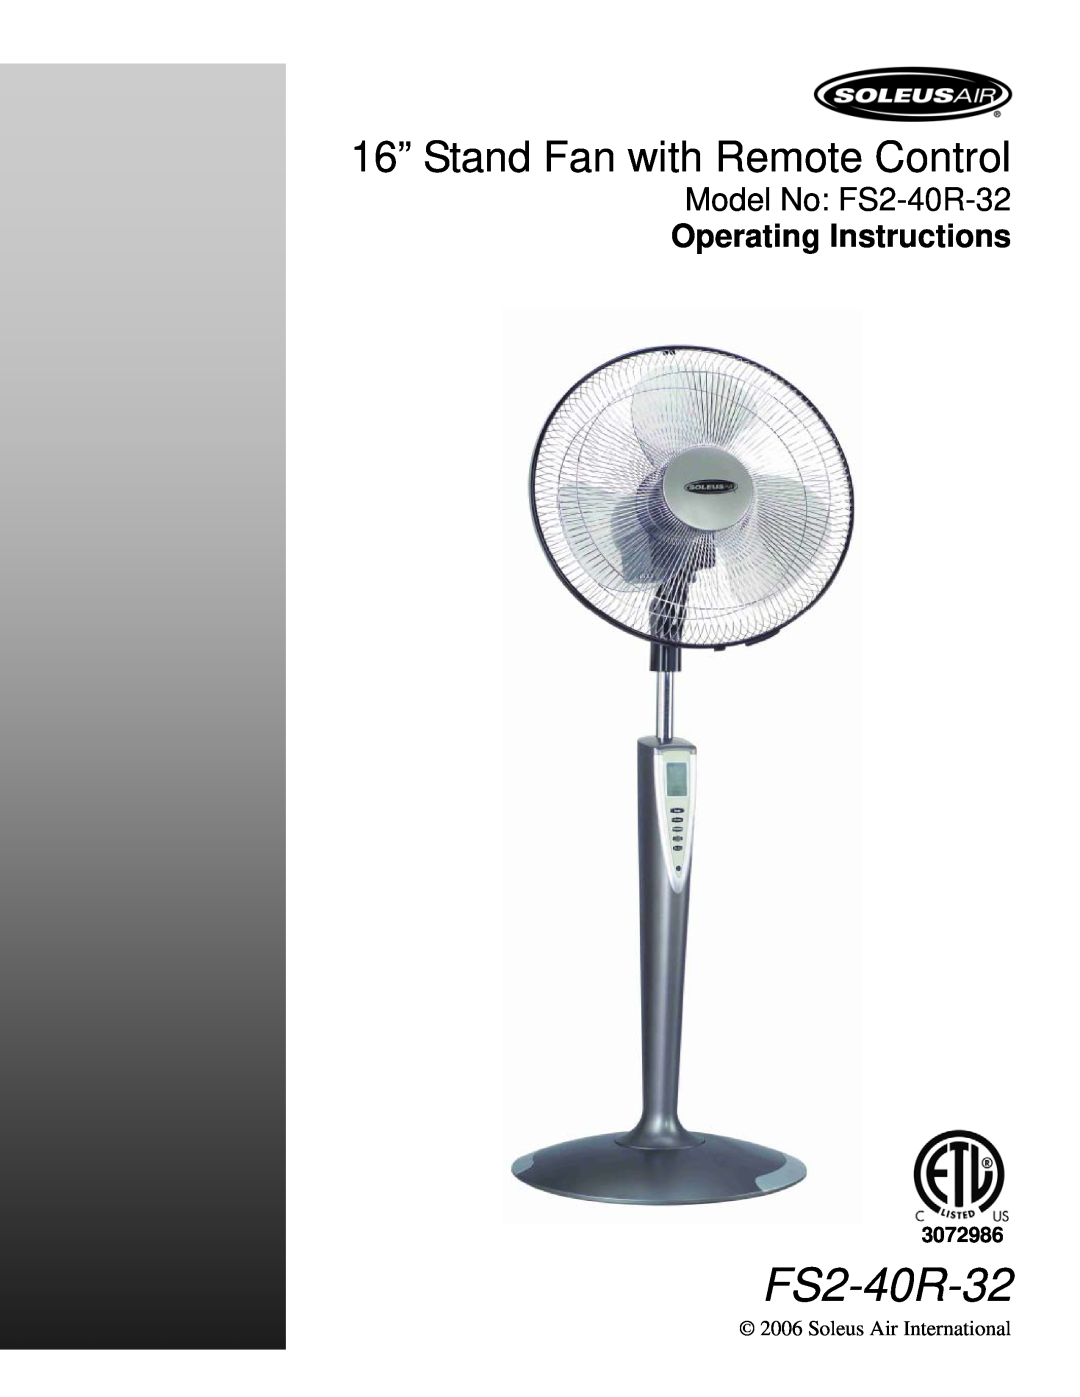 Soleus Air operating instructions 16” Stand Fan with Remote Control, Model No FS2-40R-32, Operating Instructions 